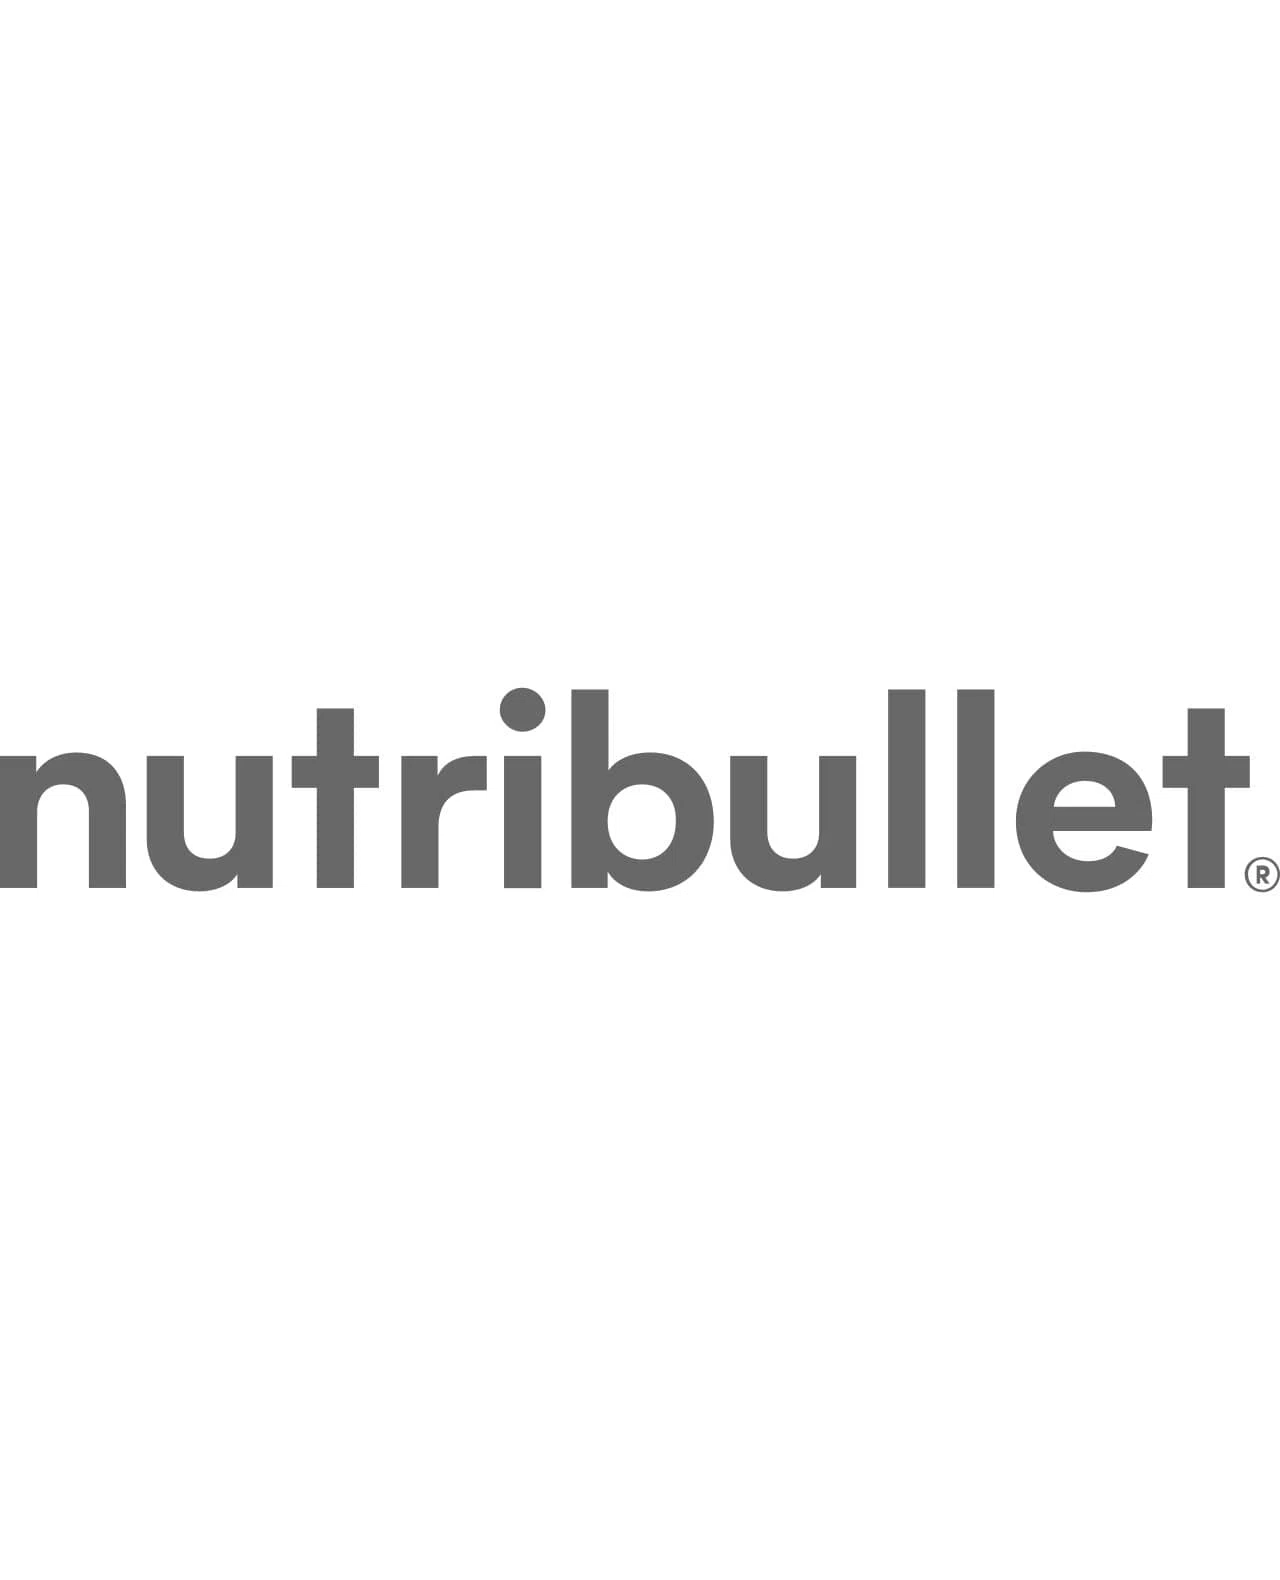 NutriBullet - Pro Plus 1200 Watt Personal Blender with Pulse Function  N12-1001 - Matte Black - Coupon Codes, Promo Codes, Daily Deals, Save Money  Today